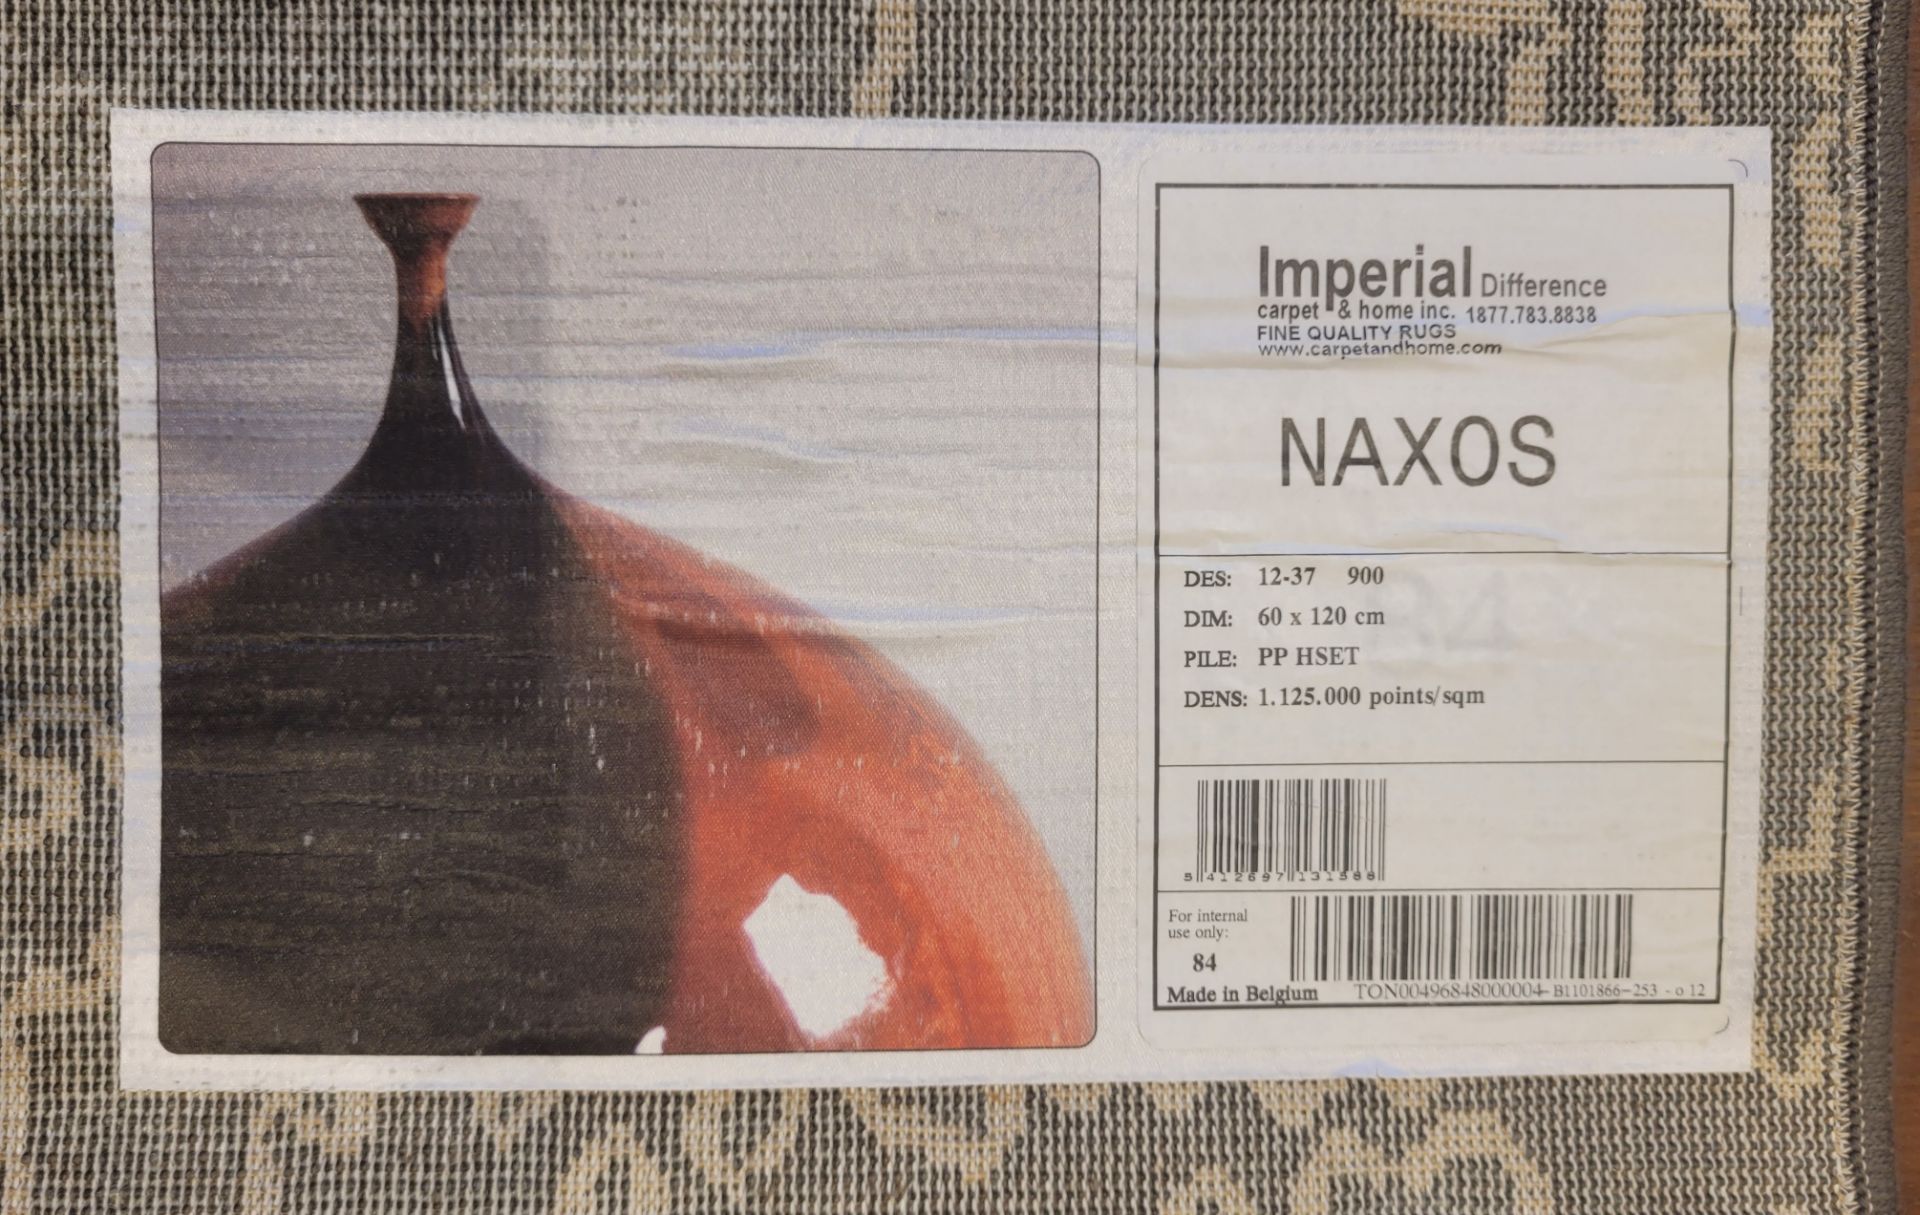 2' X 4' NAXOS MADE IN BELGIUM - MSRP $199.00 EA.(LOCATED IN WALL-TO-WALL) INVENTORY CODE: 12-37 900 - Image 3 of 3